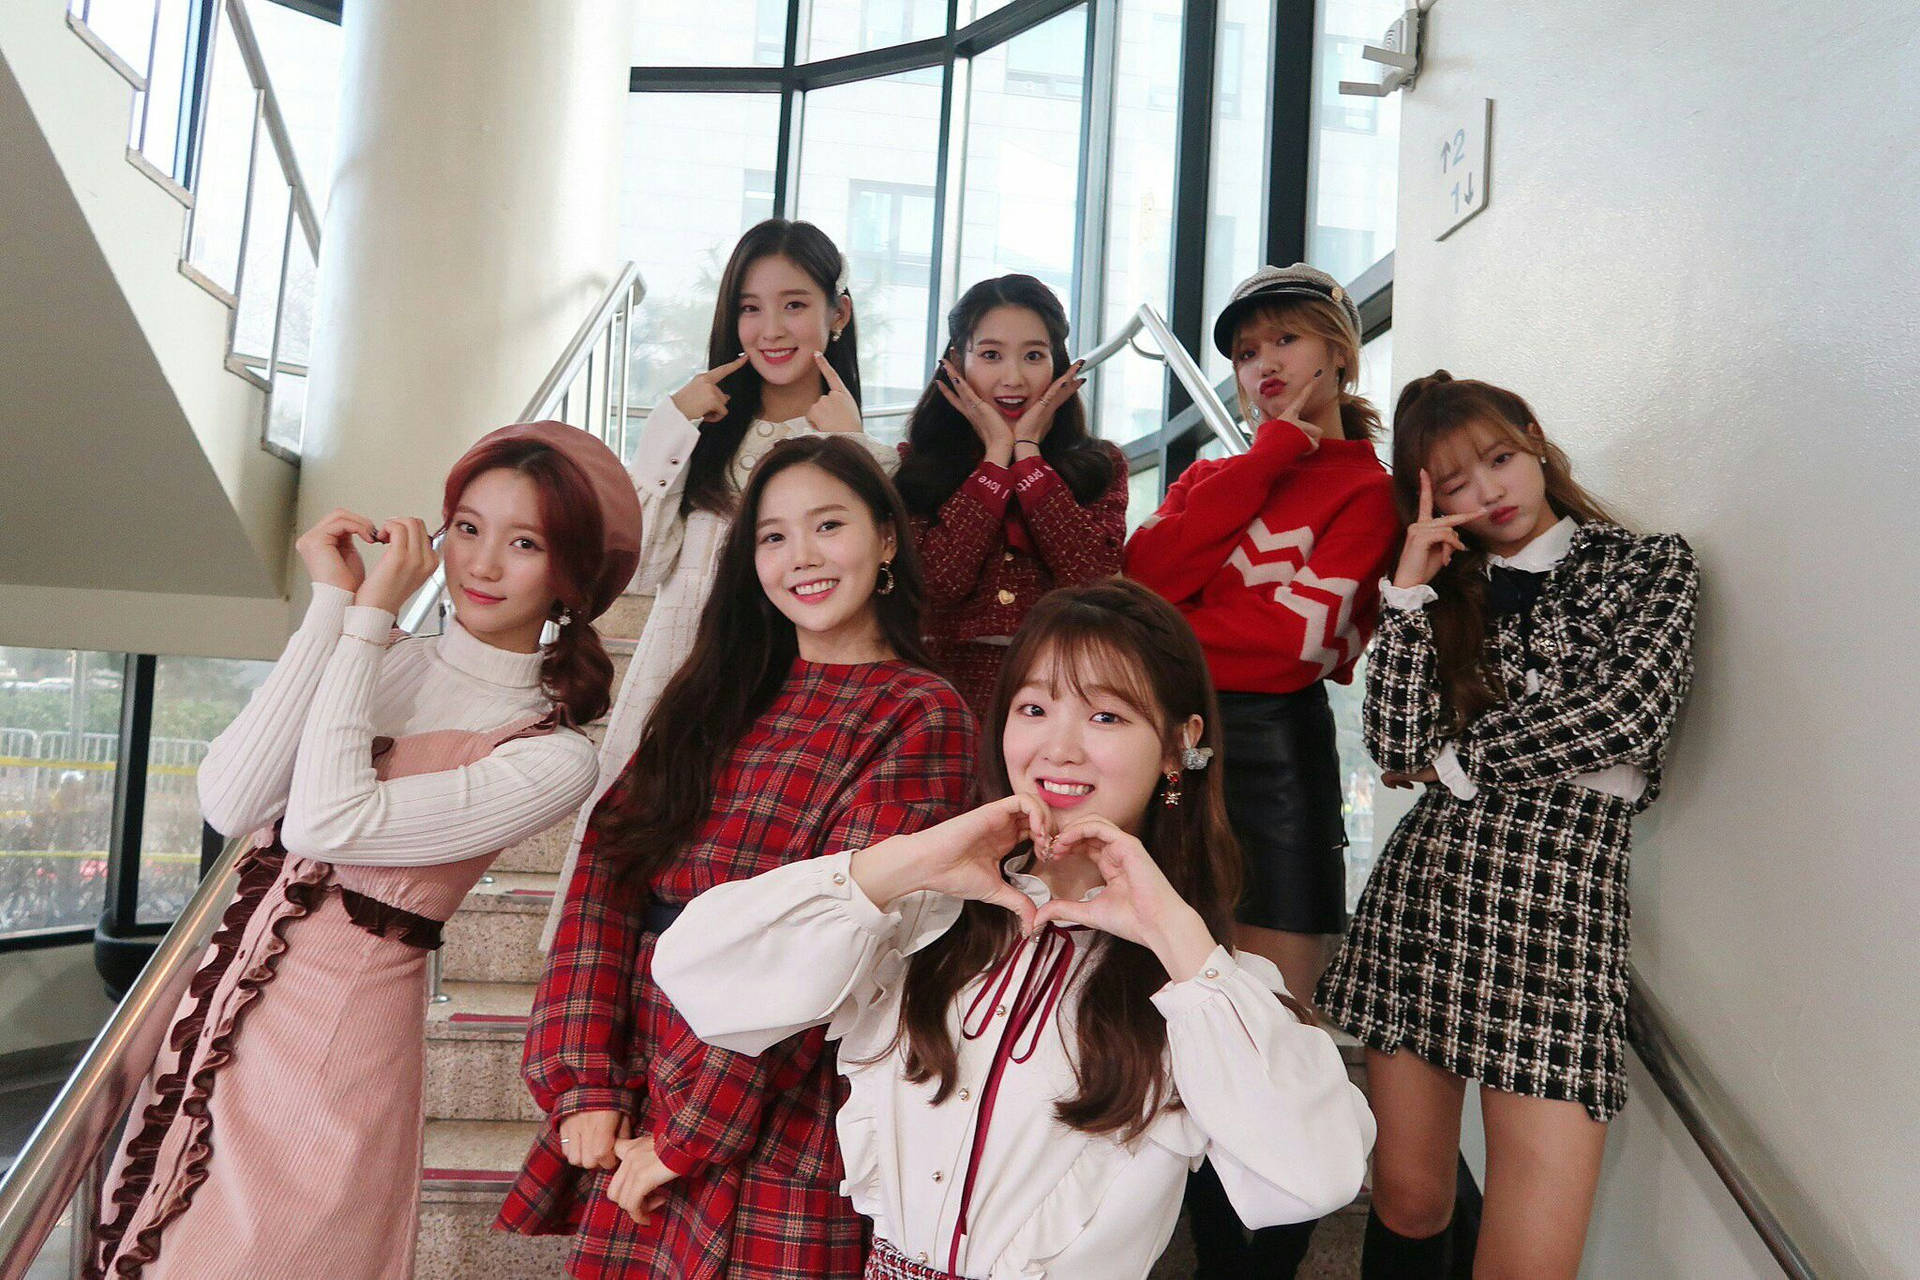 South Korean Pop Sensation Oh My Girl In A Candid Group Photo Background